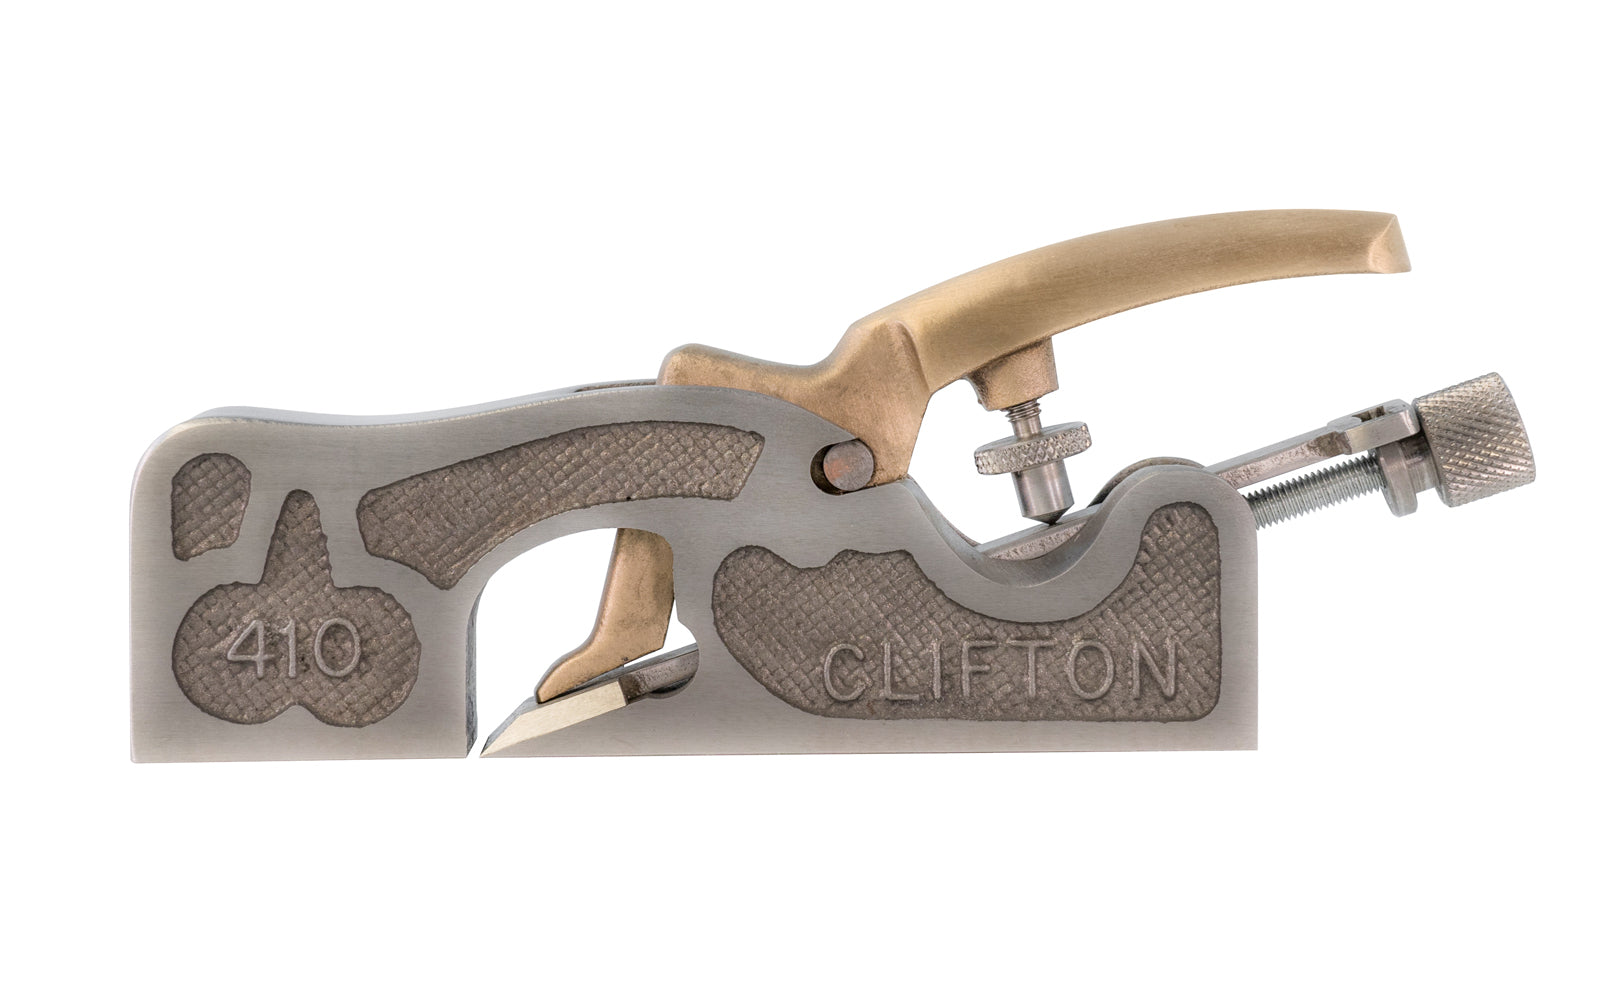 The Clifton 410 Shoulder Rebate Plane. 11/16" (18 mm) wide cutter blade. The body is machined from quality grey iron casting and is precision ground on the sole and the sides. Cutting edge is ground to 25° primary & 30° secondary - Blade made from high quality oil hardened steel, 59-61 rockwell C hardness. Model 410.